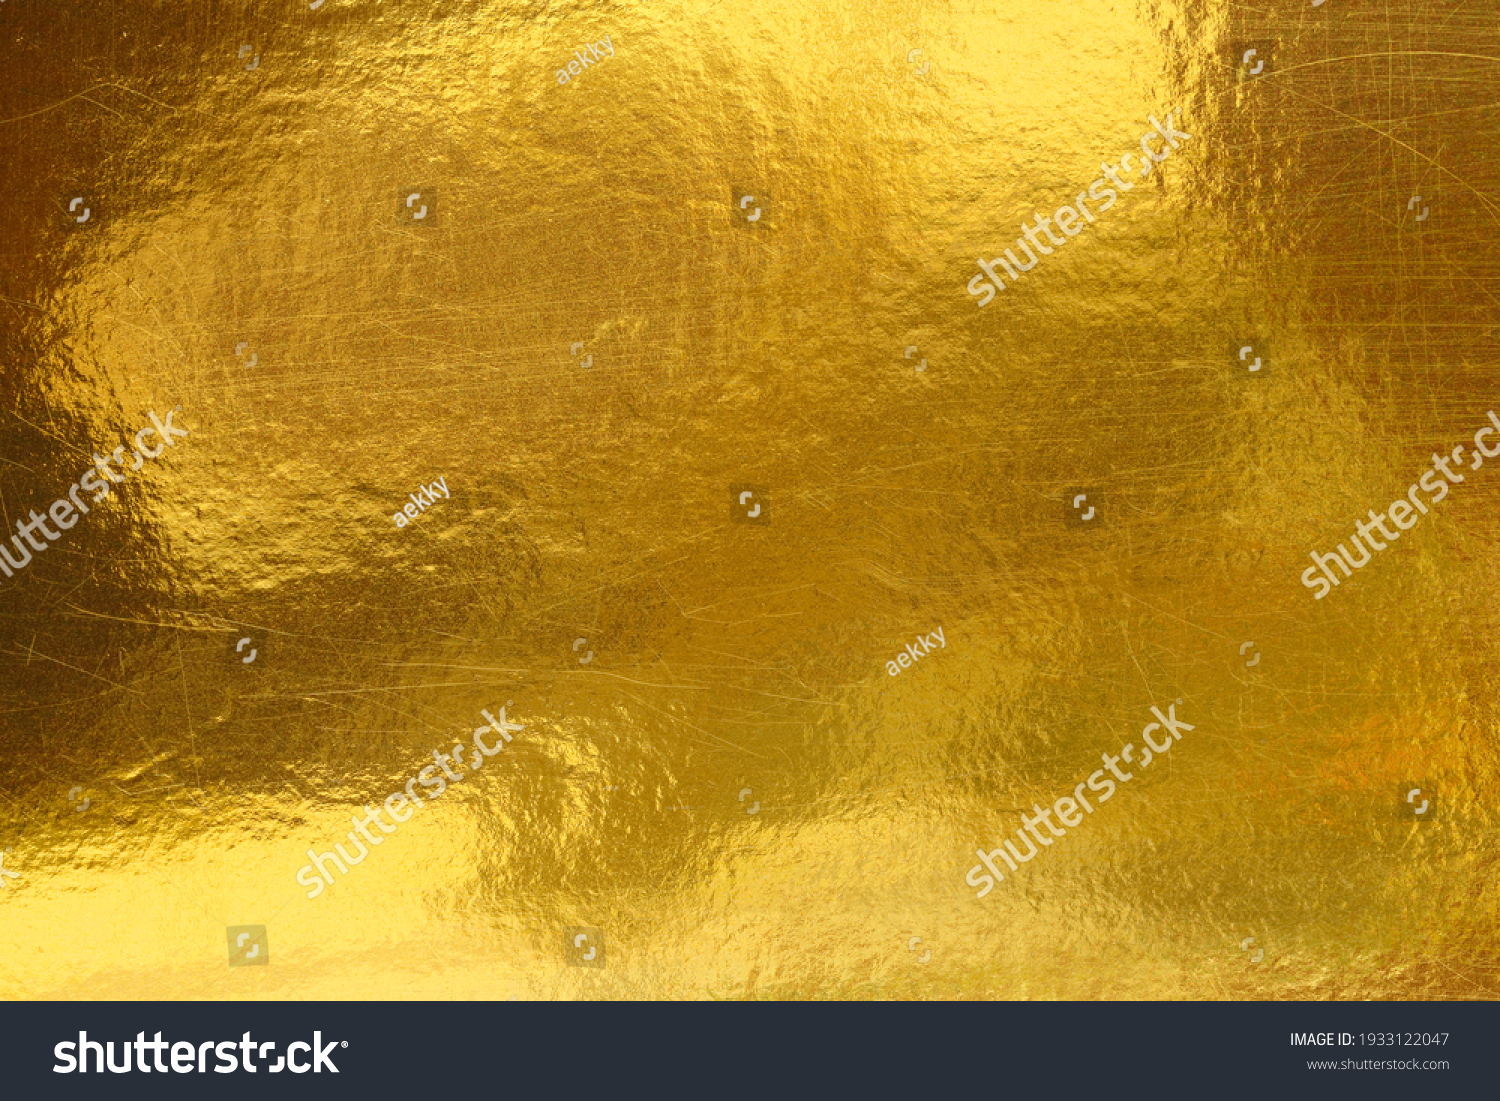 Gold background or texture and Gradients shadow #1933122047